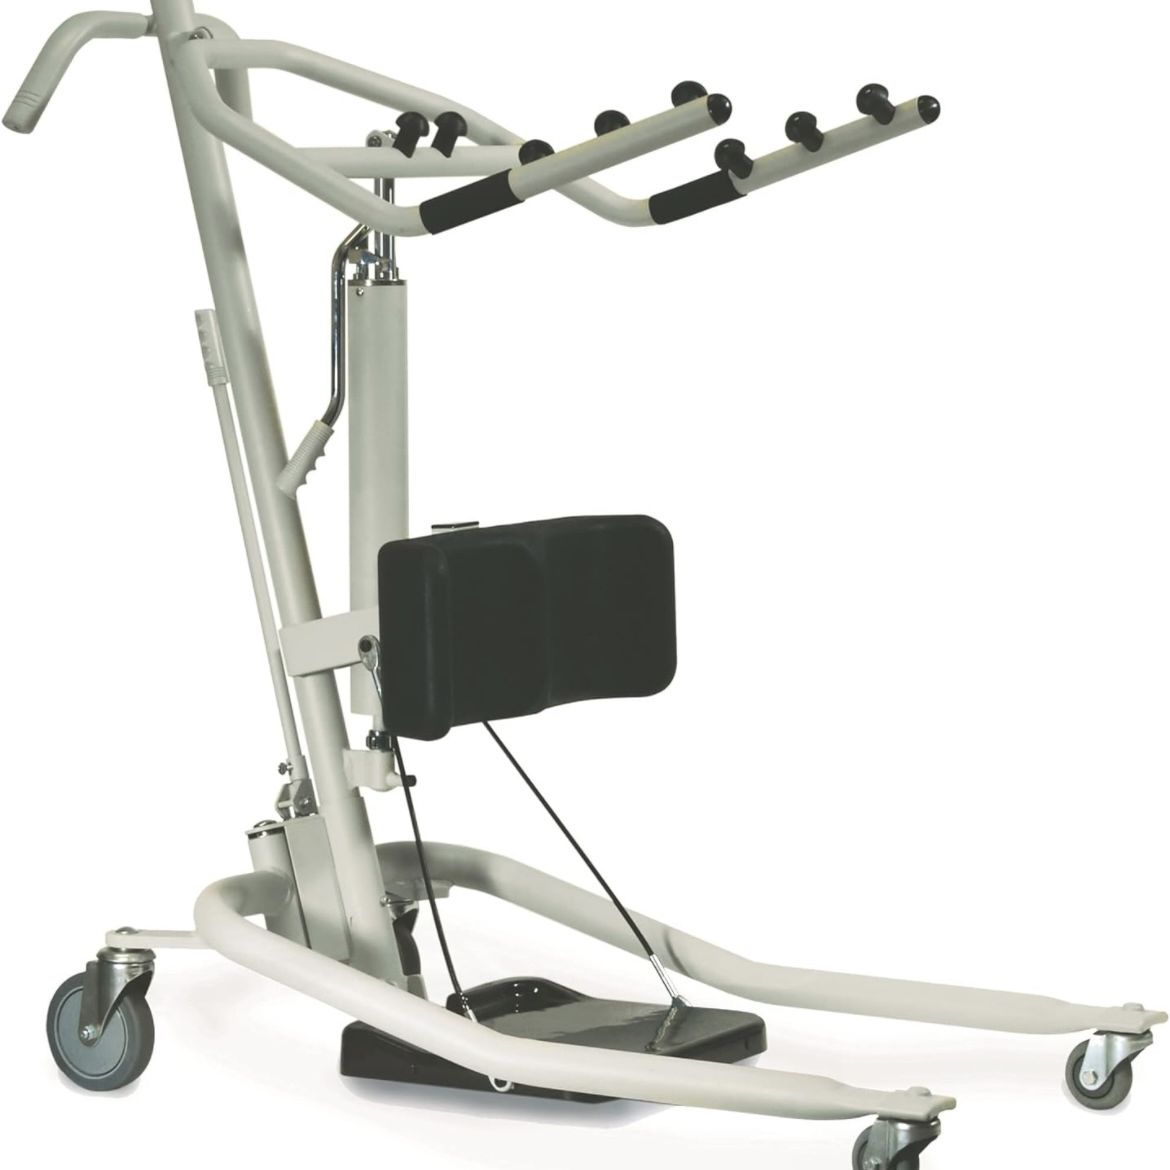 28-90 Invacare GHS350 Get-U-Up Hydraulic Sit to Stand Patient Lift, 350 lb. Weight Capacity